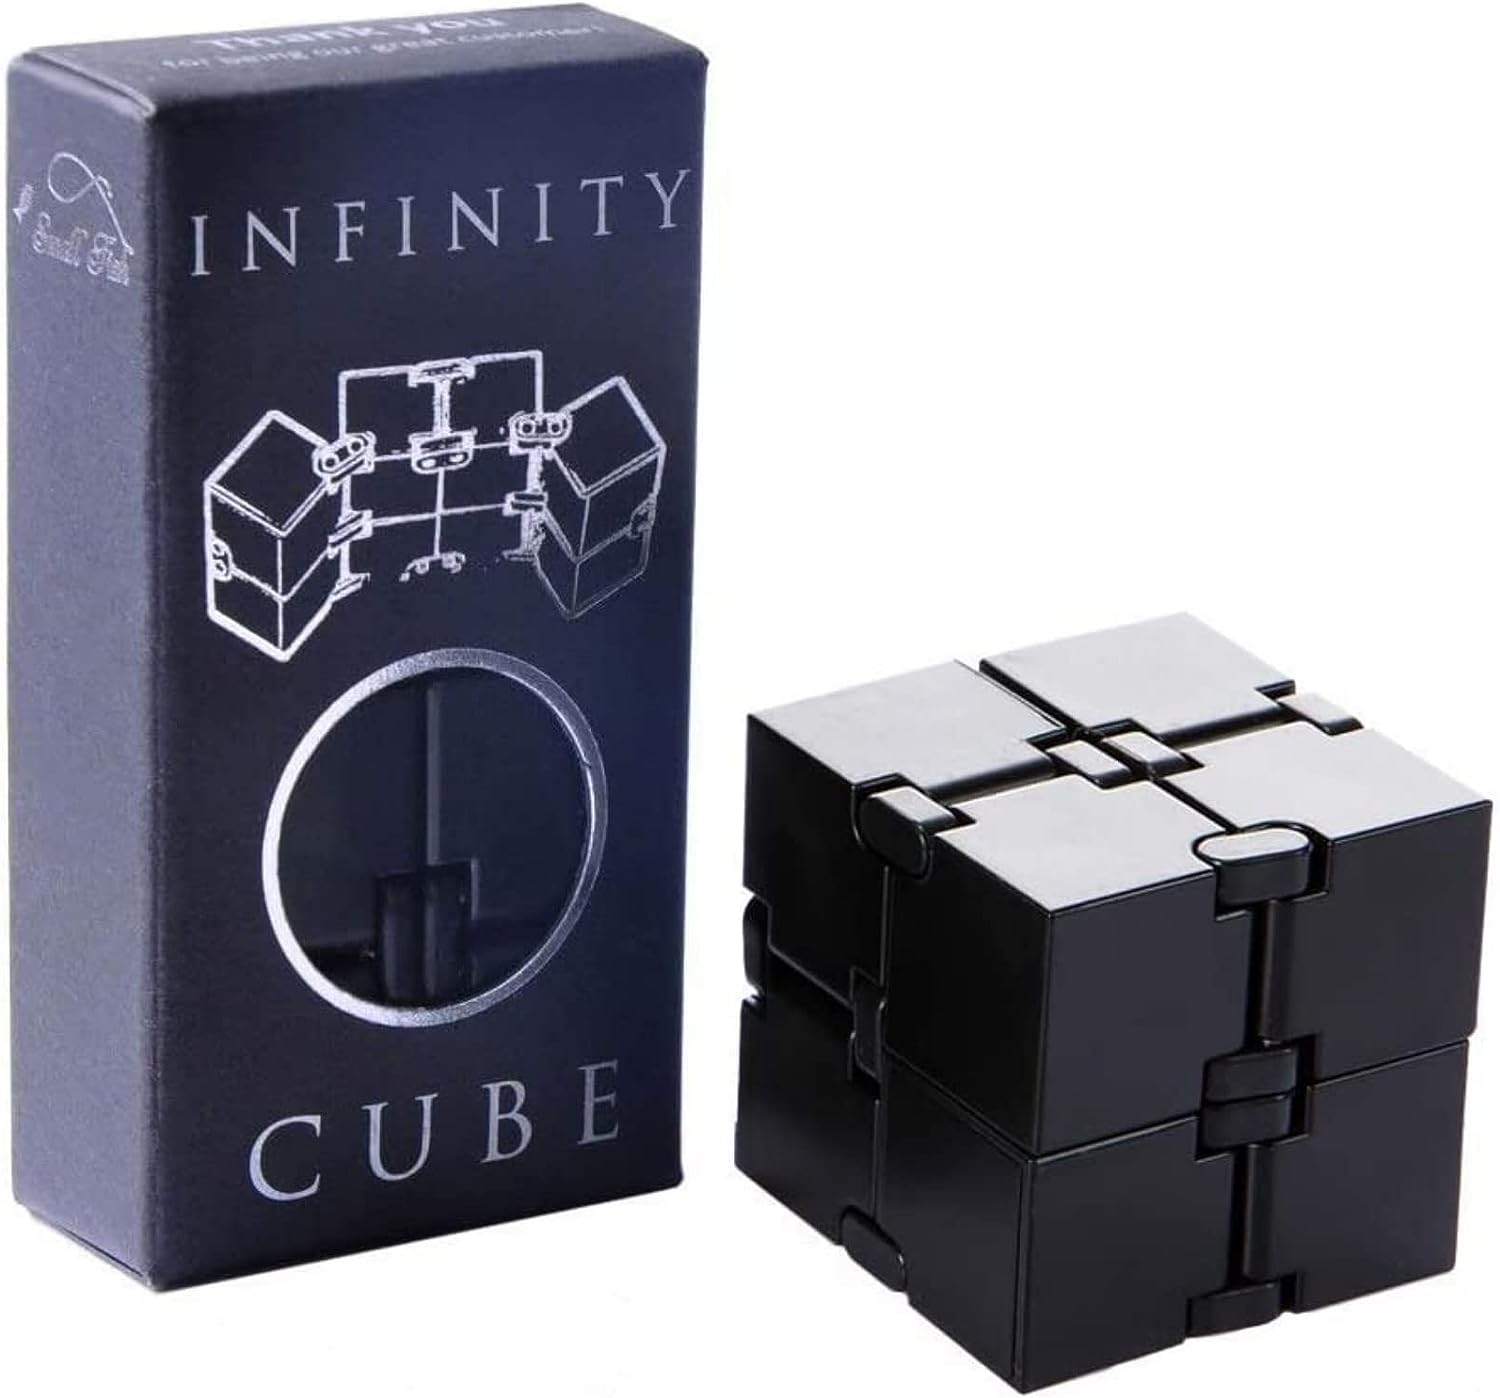 Stress Relief Cube - Infinity Cube Toy